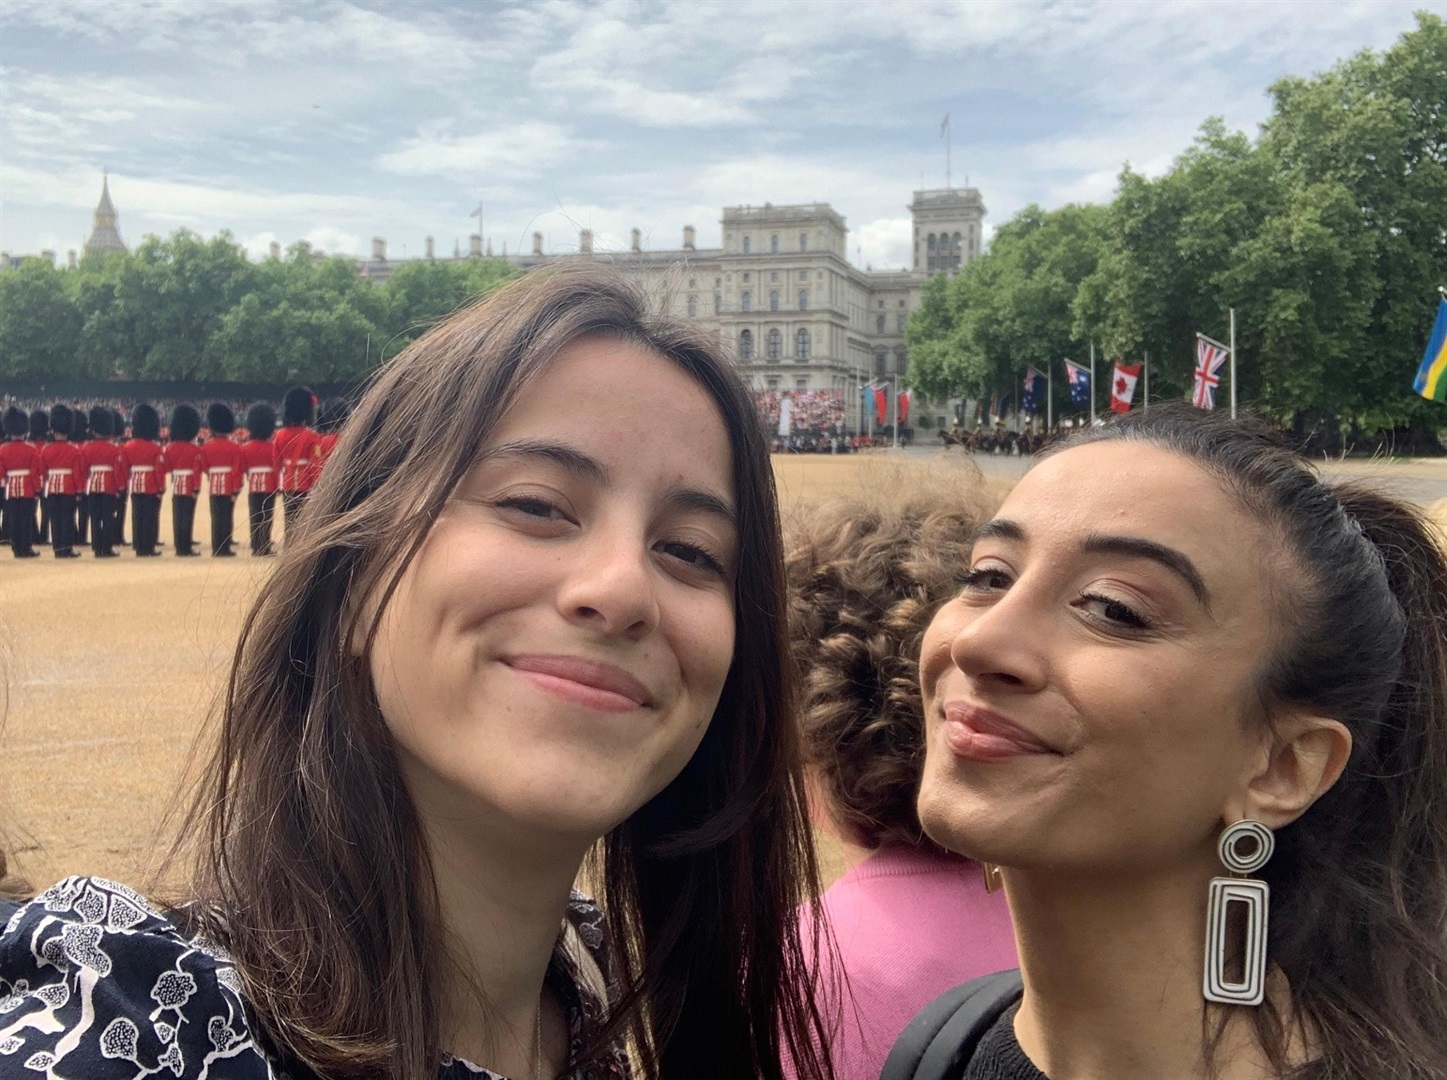 Maria Noyen and Armani Syed attending Trooping the Colour 2022 in London.